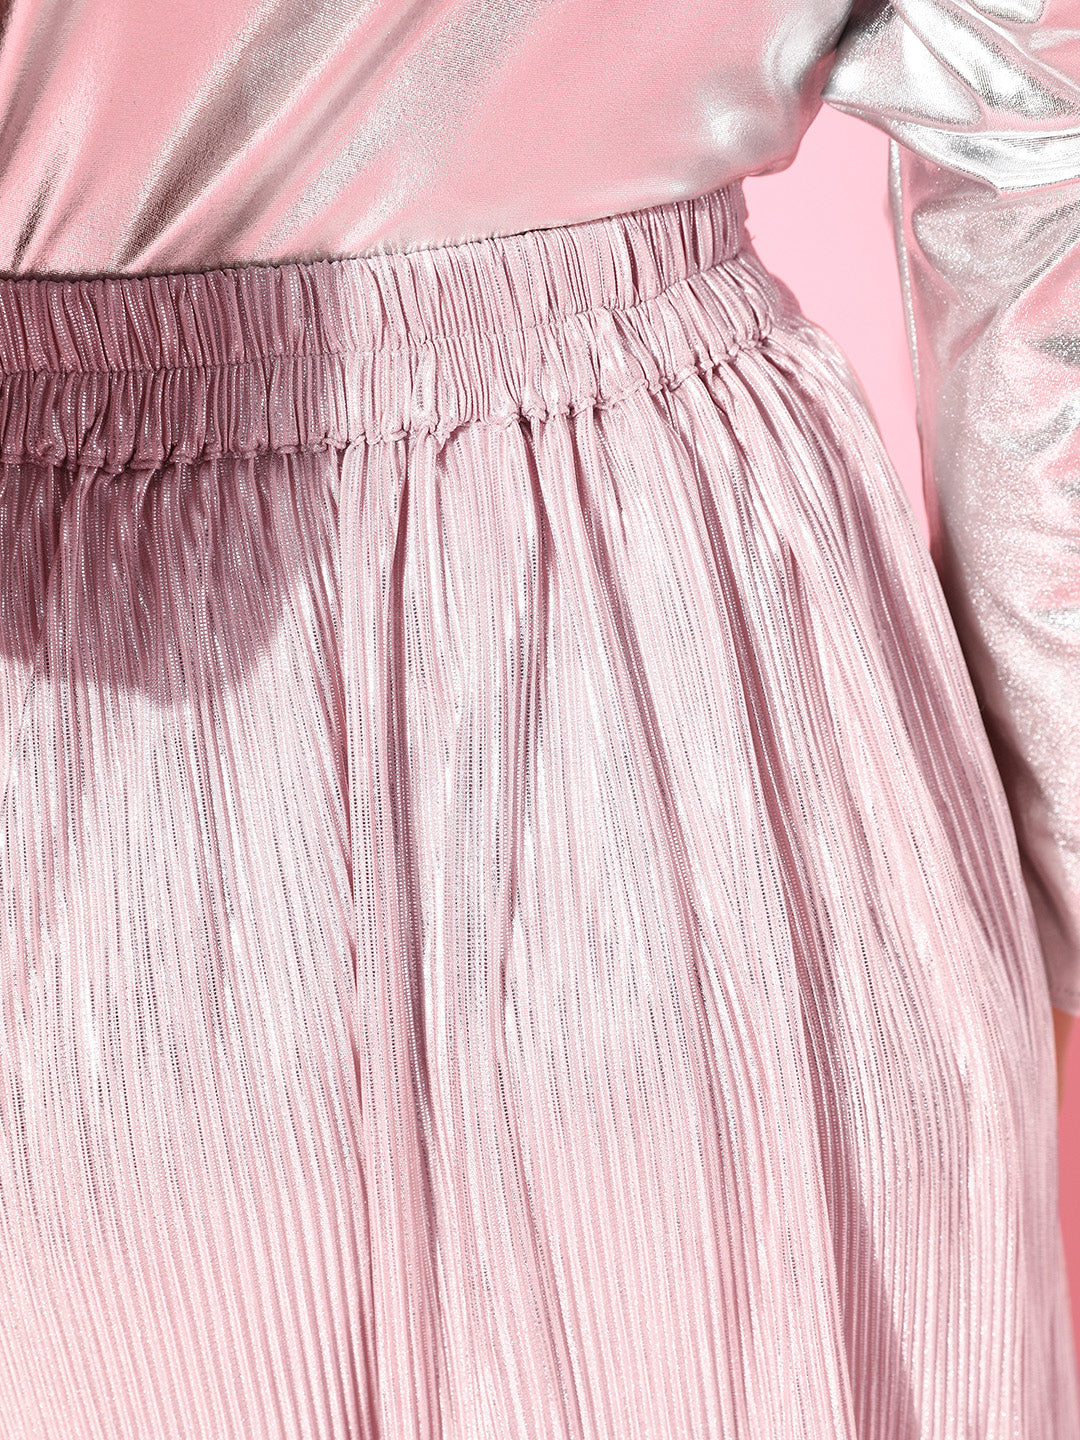 Athena Pink A-Line Shimmery Accordion Pleated Skirt - Athena Lifestyle